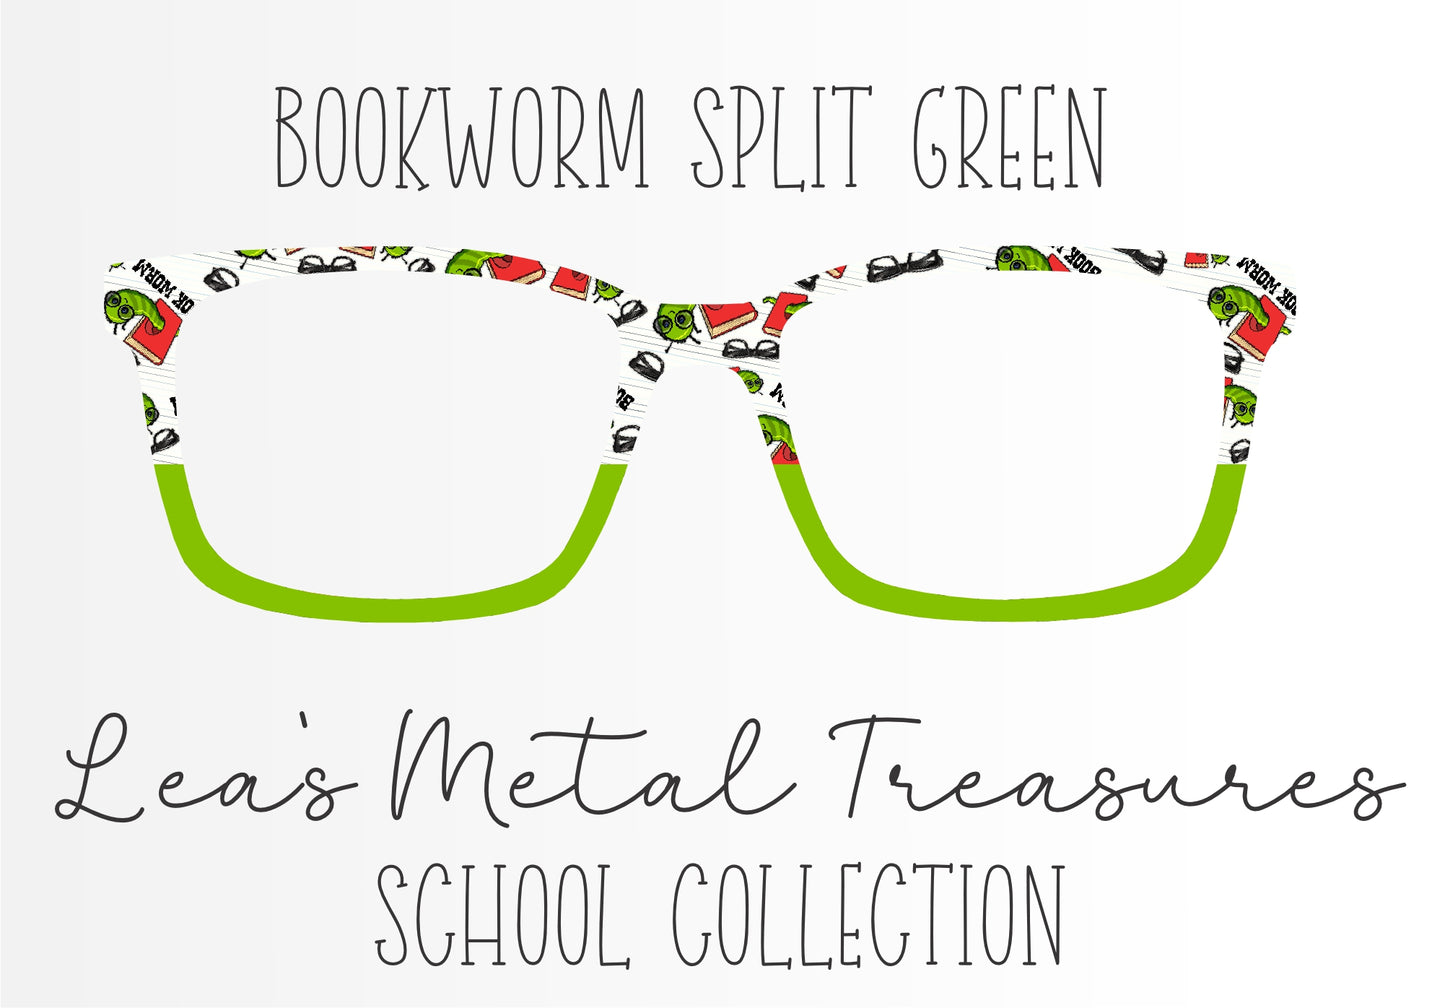 BOOKWORM SPLIT GREEN Eyewear Frame Toppers COMES WITH MAGNETS